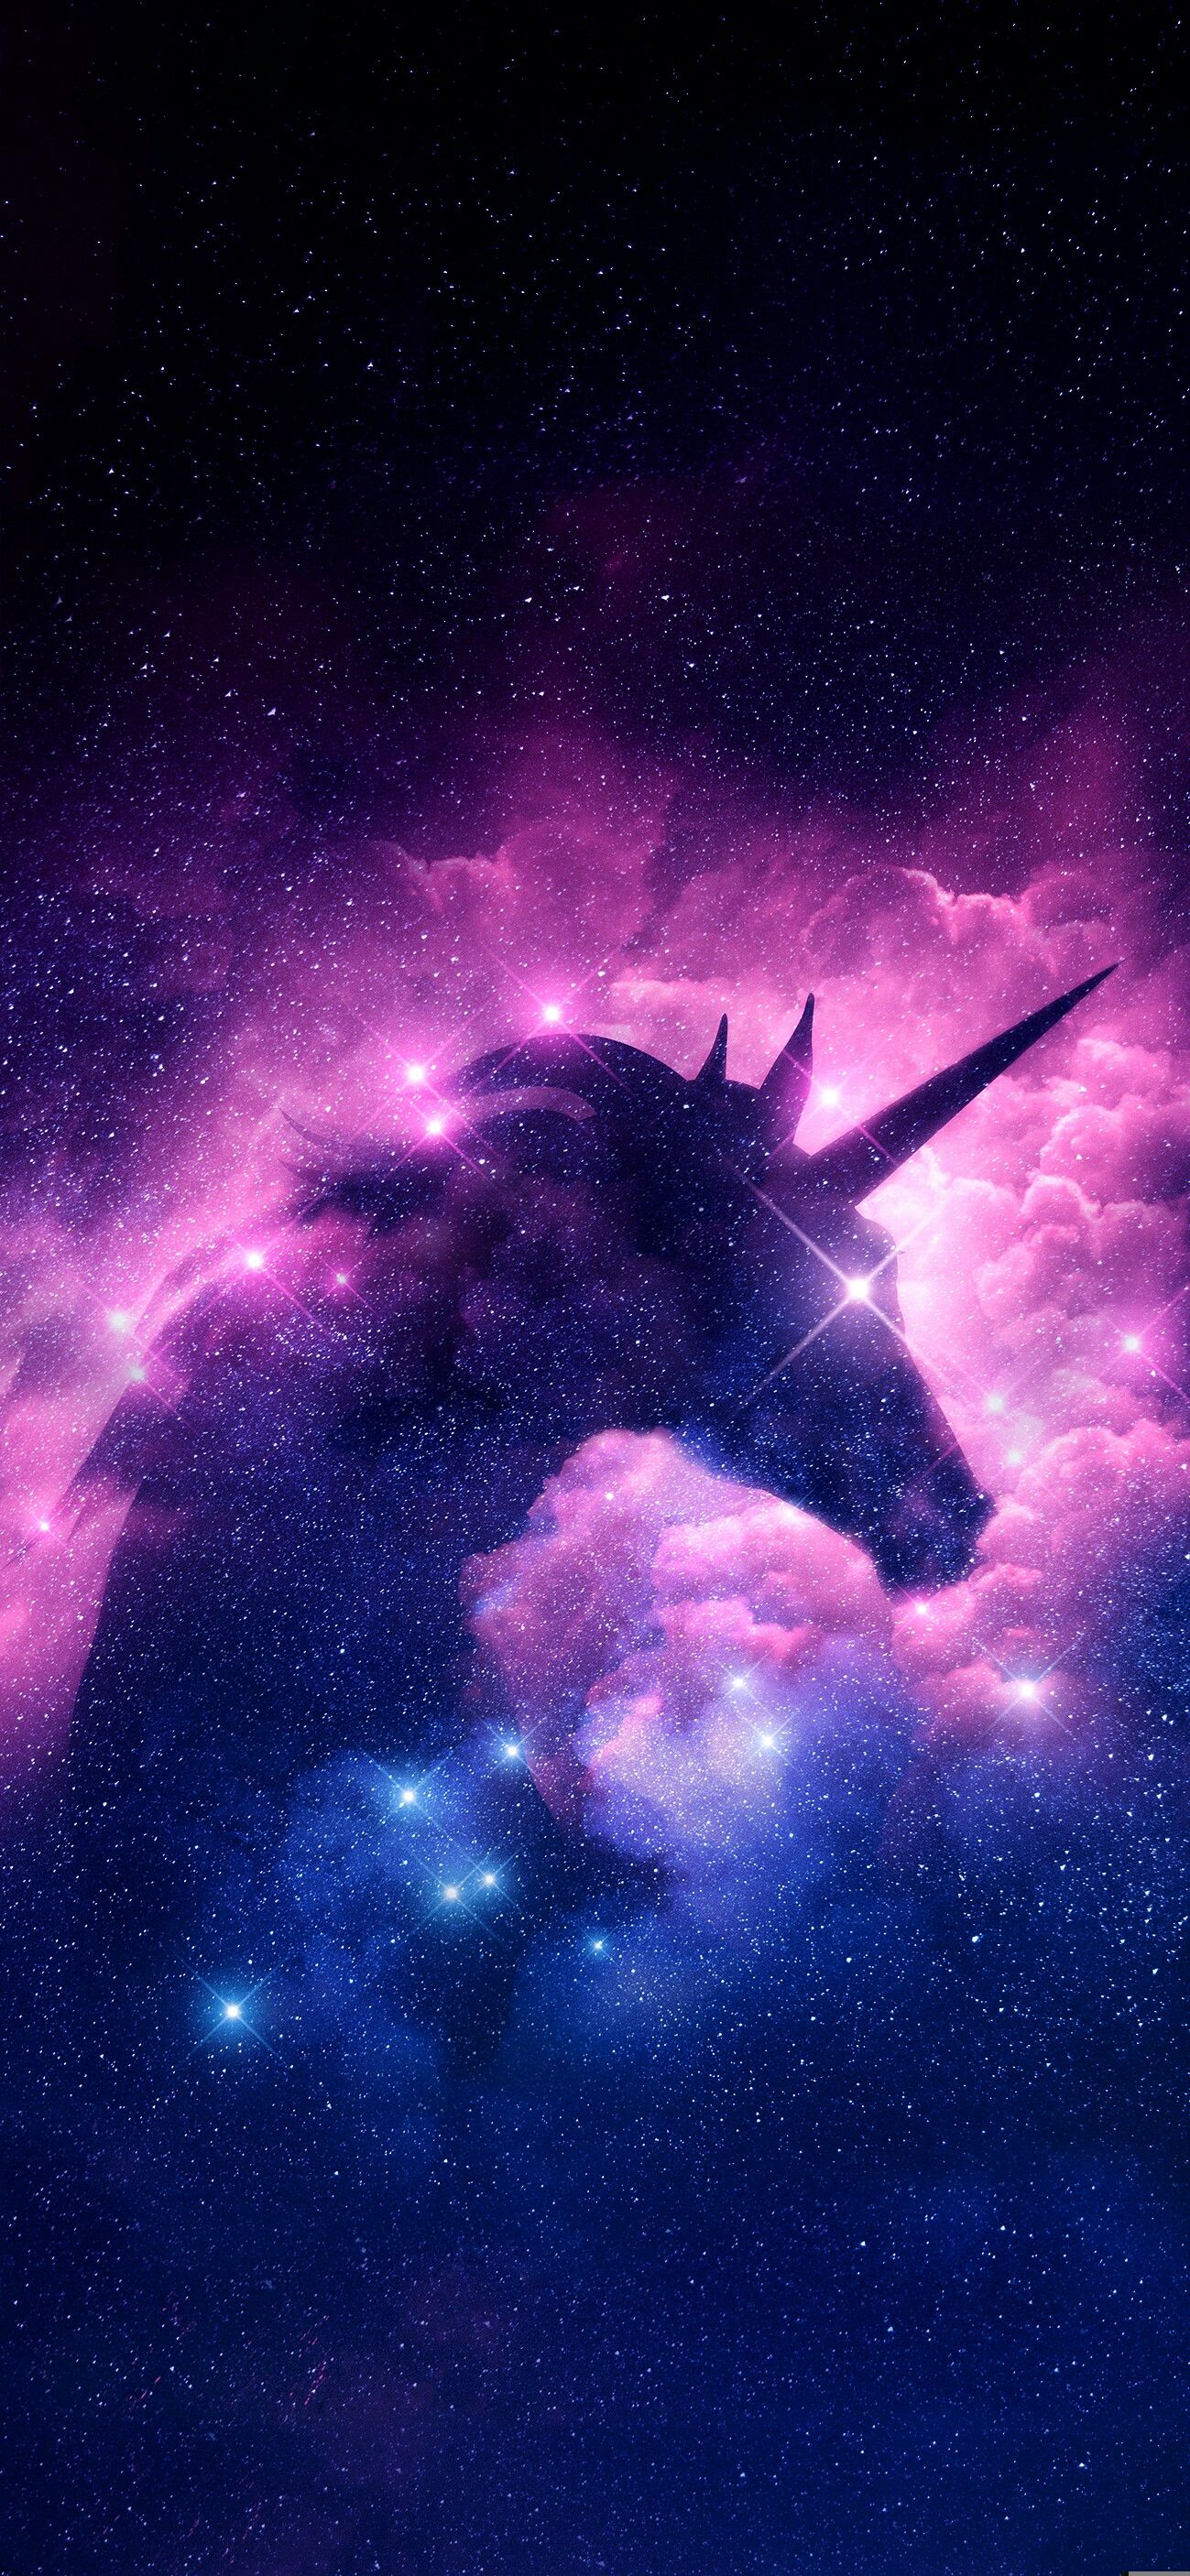 Jean Gravely On Unicorns In Galaxy Wallpaper iPhone